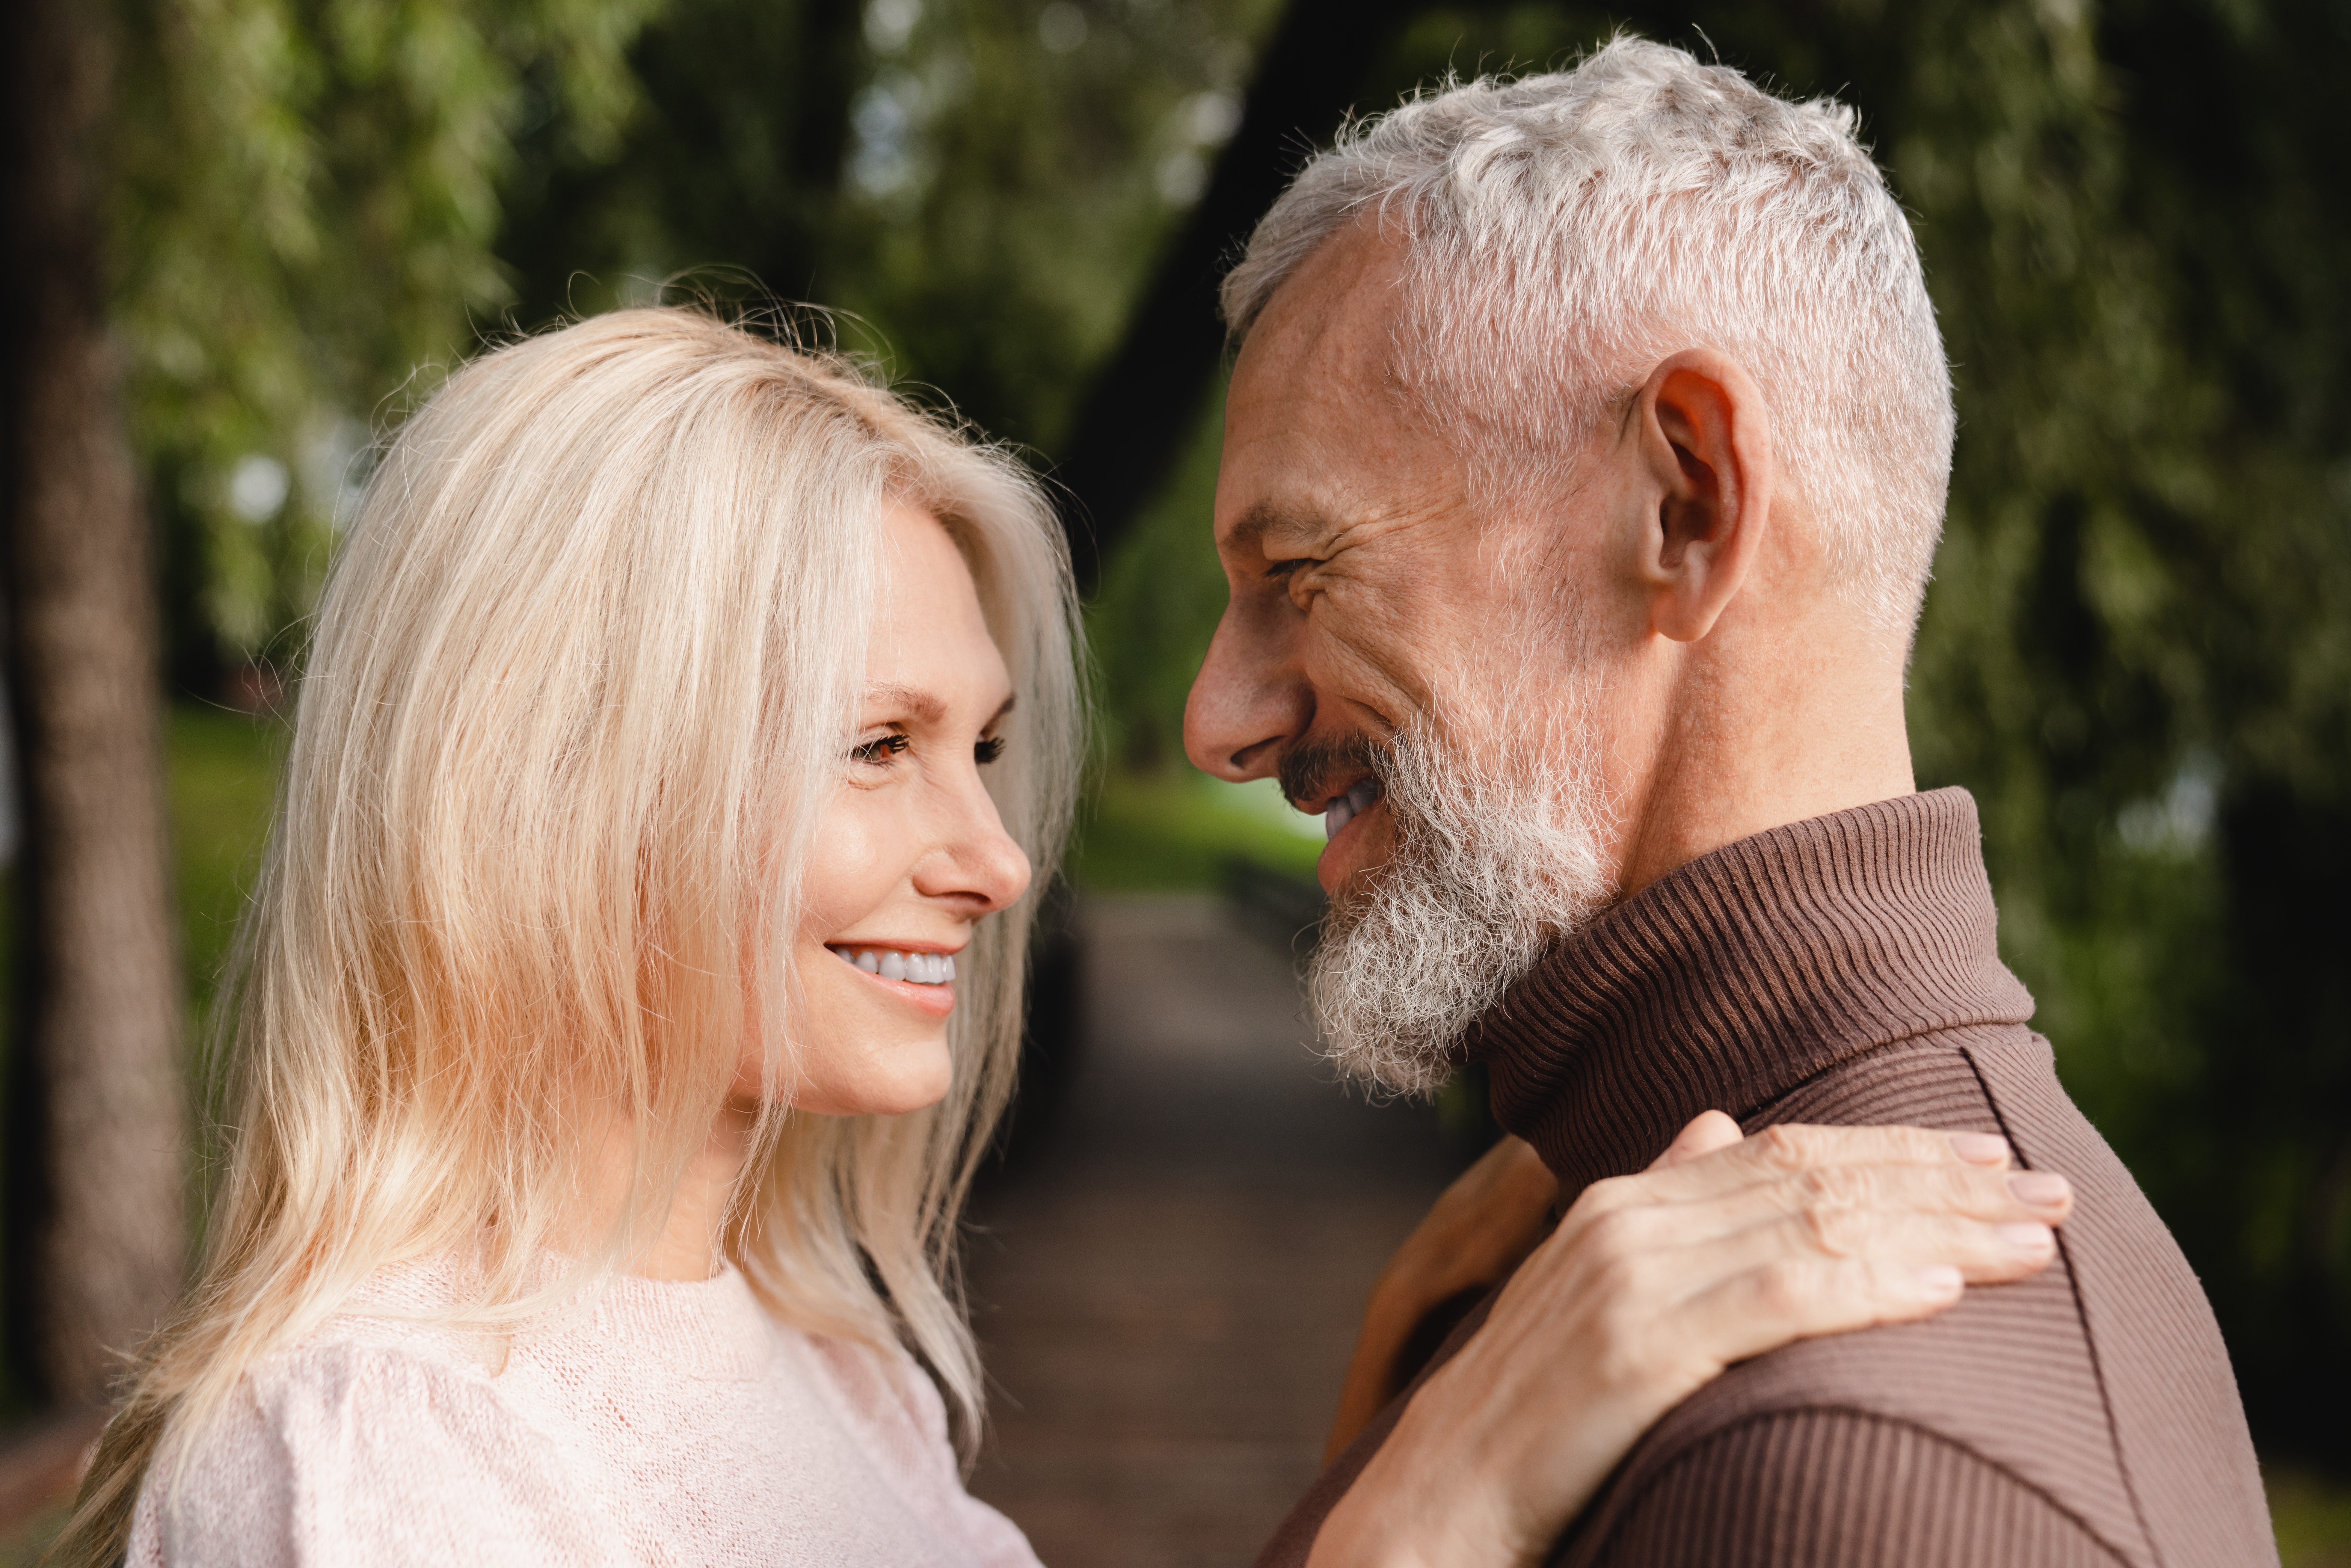 A middle-aged couple looking at each other with love | Source: Shutterstock